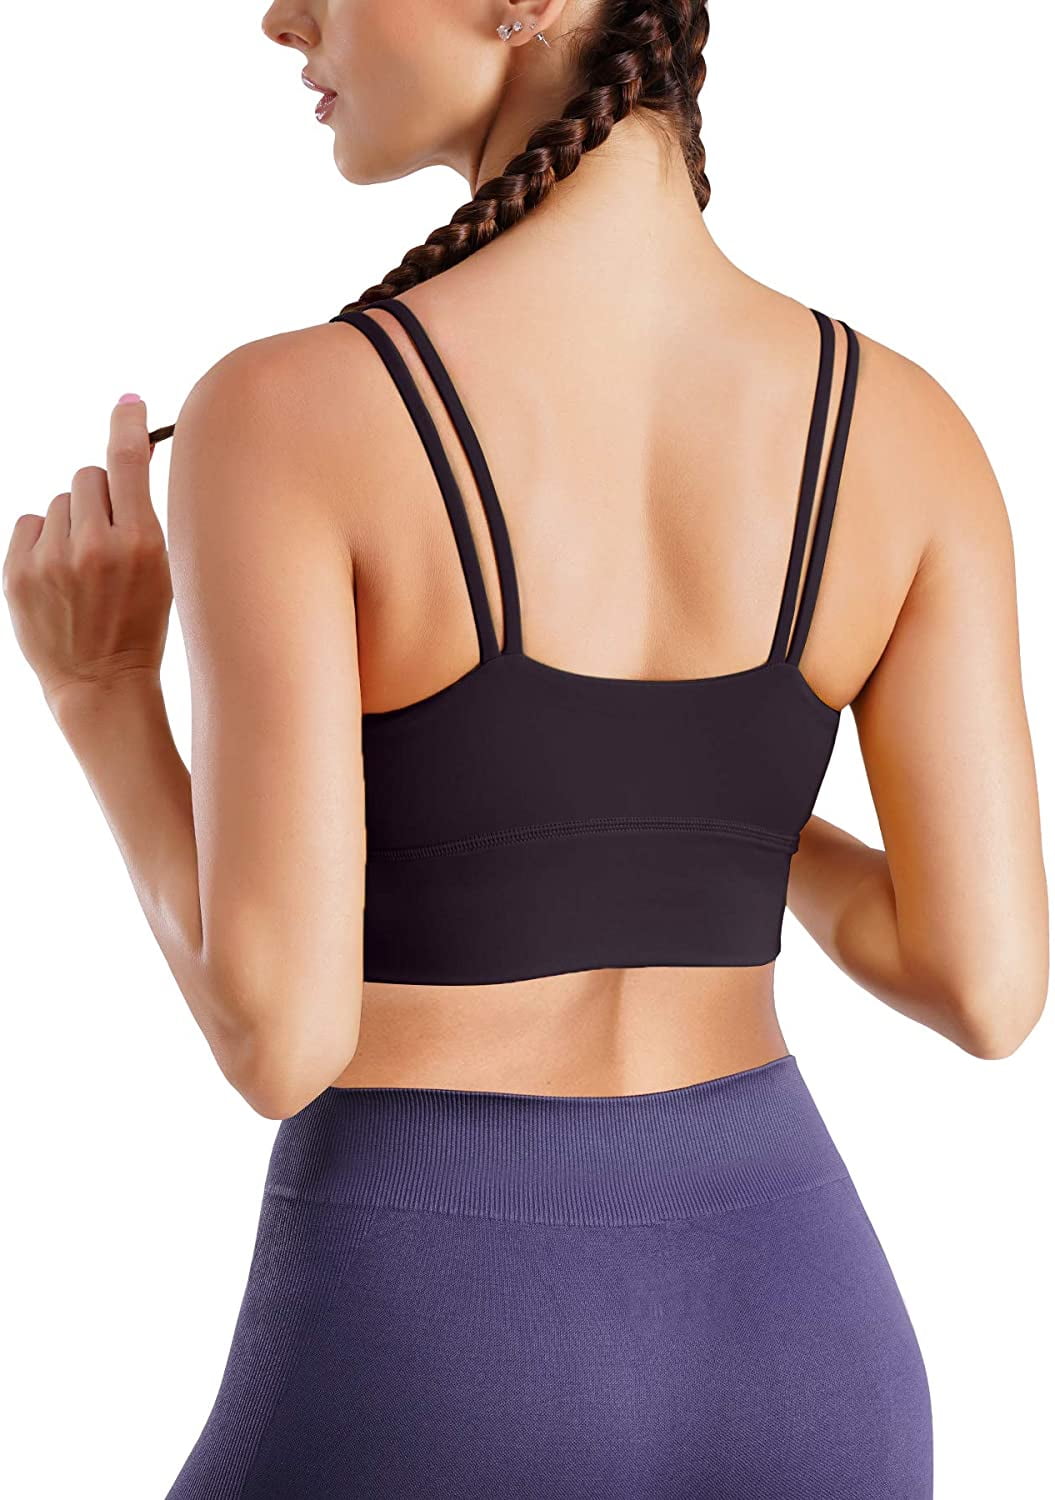 Comfort Ladies Crisscross Back Strappy Crop Top Bras with Removable Pads for Running Yoga Fitness Exercise Maylisacc Seamless Sports Bra for Women 